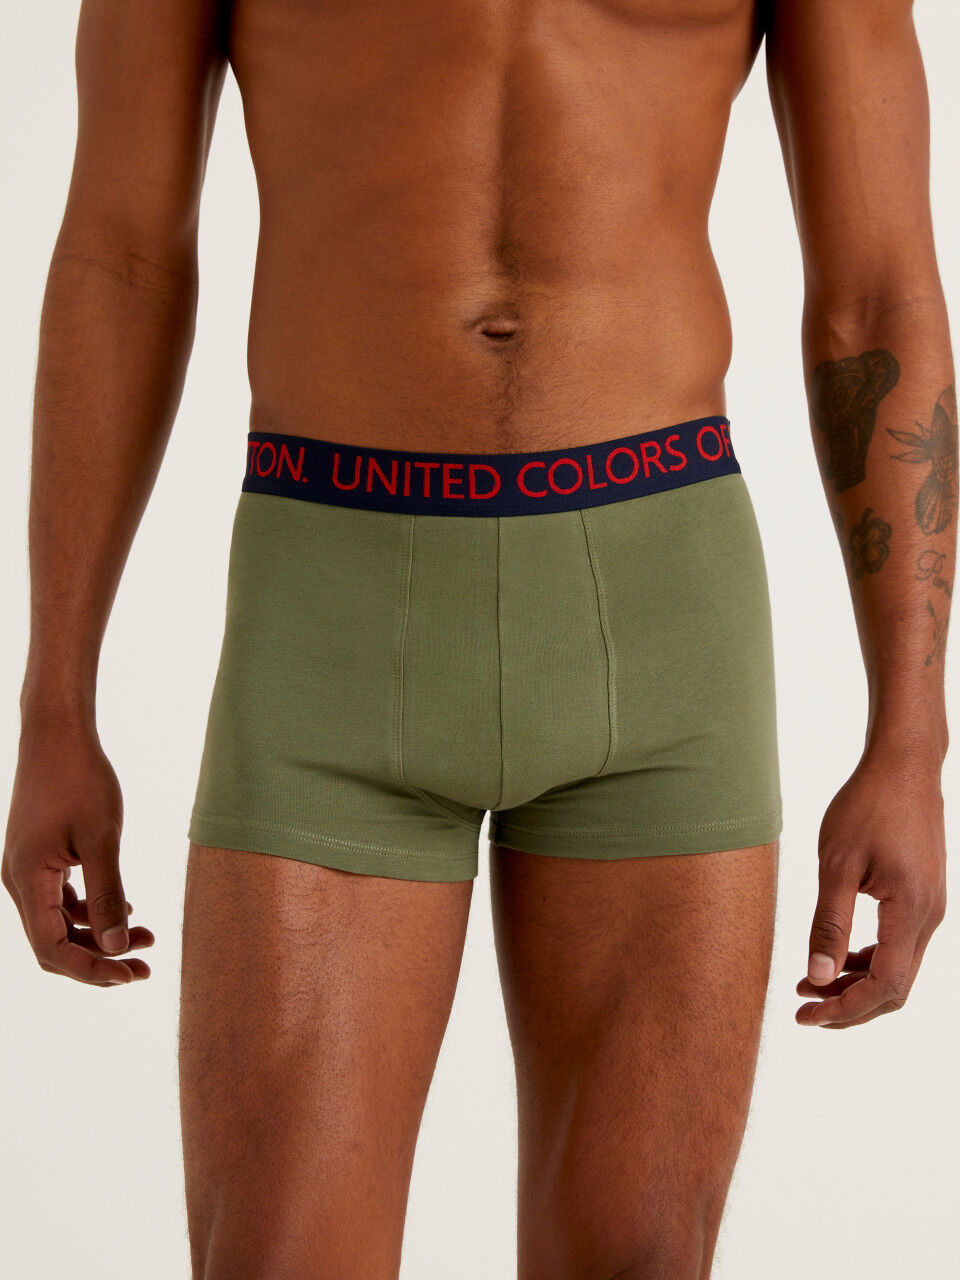 United Colors of Benetton Mens Cotton Trunk